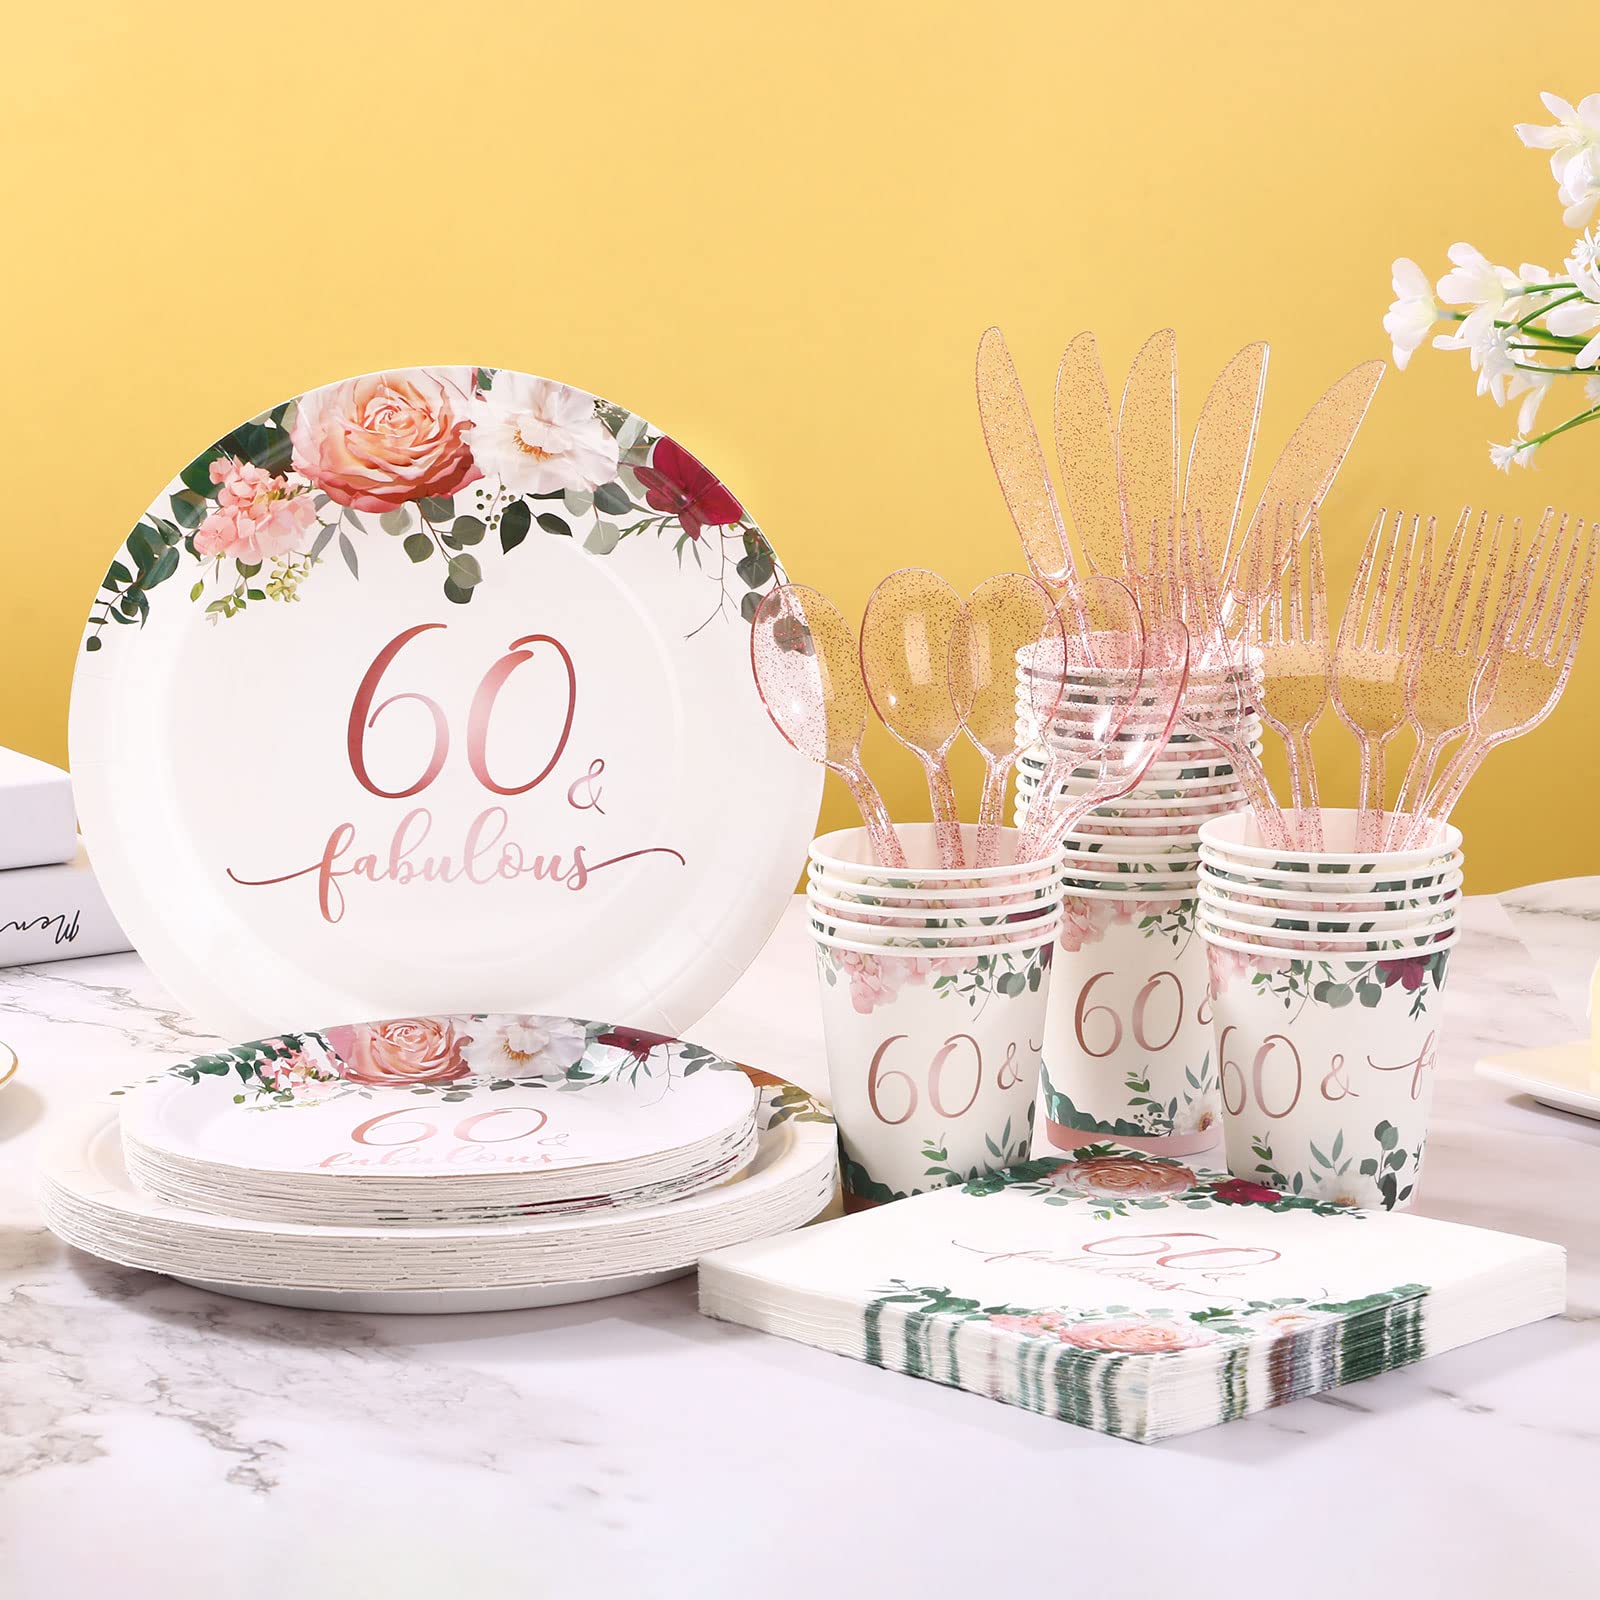 168pcs 60th Birthday Decorations - 60th Birthday Plates and Napkins Party Supplies for Women 60th Birthday Party Decorations,Serves 24